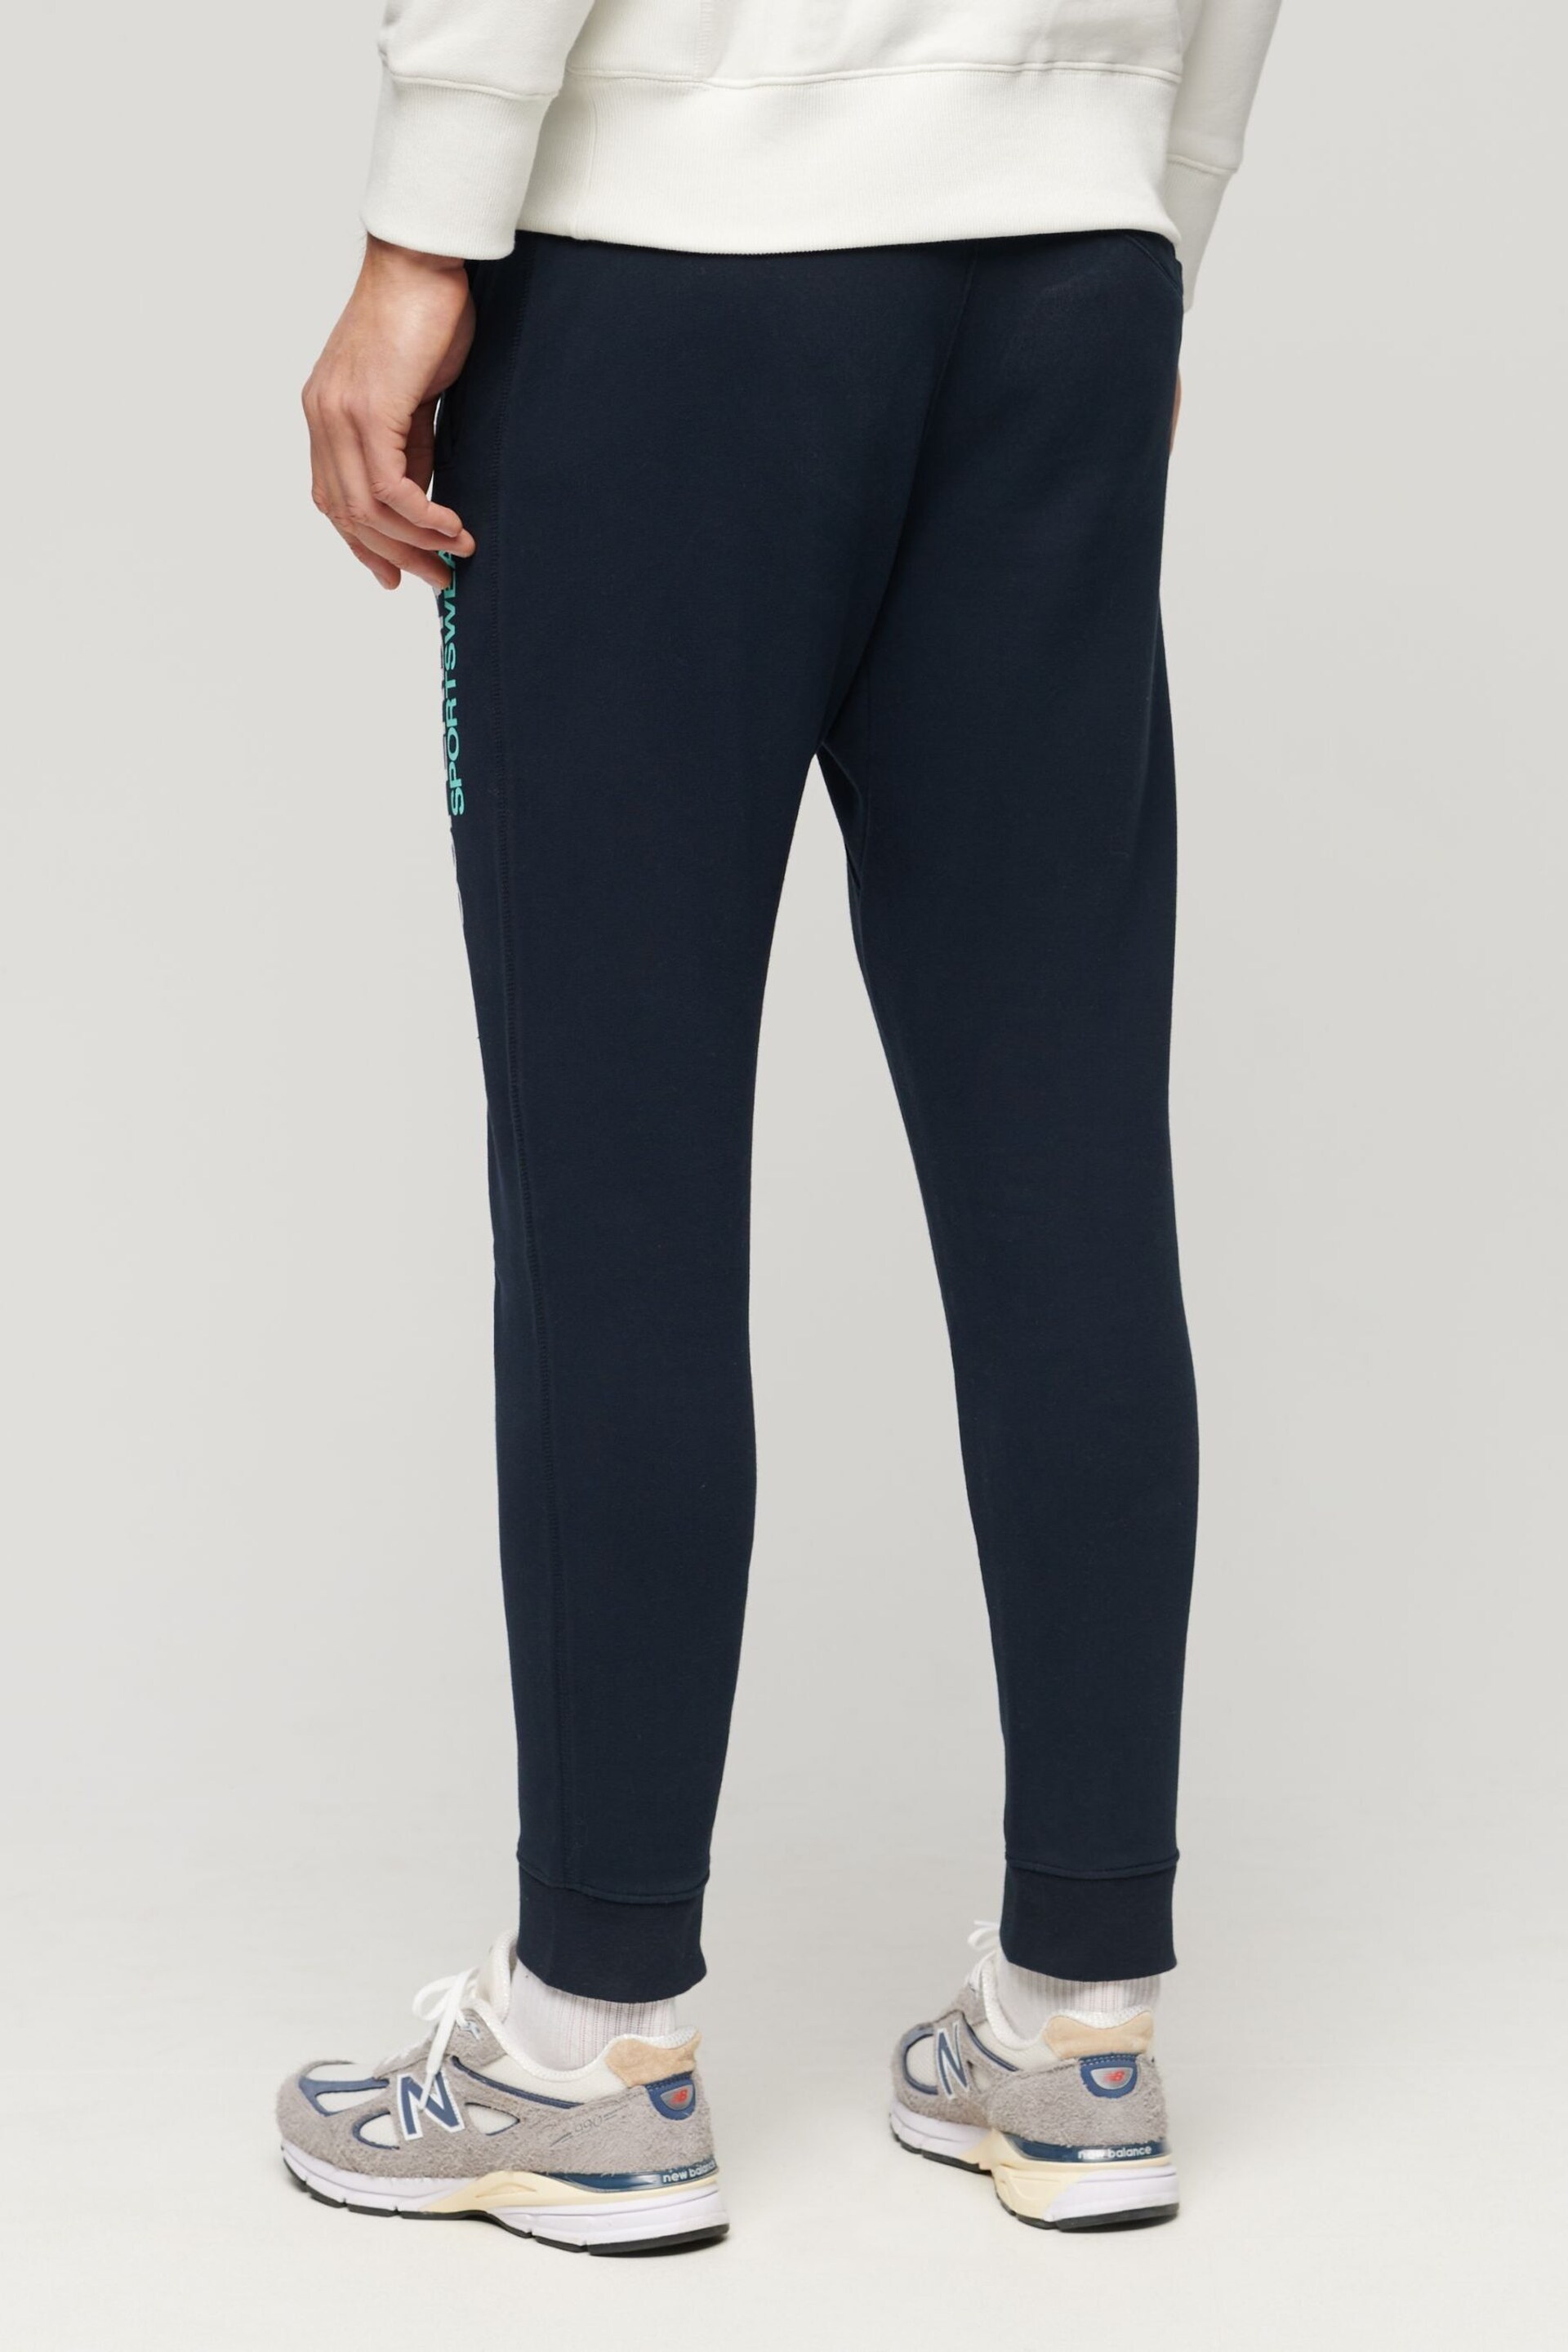 Superdry Blue Sportswear Logo Tapered Joggers - Image 2 of 6